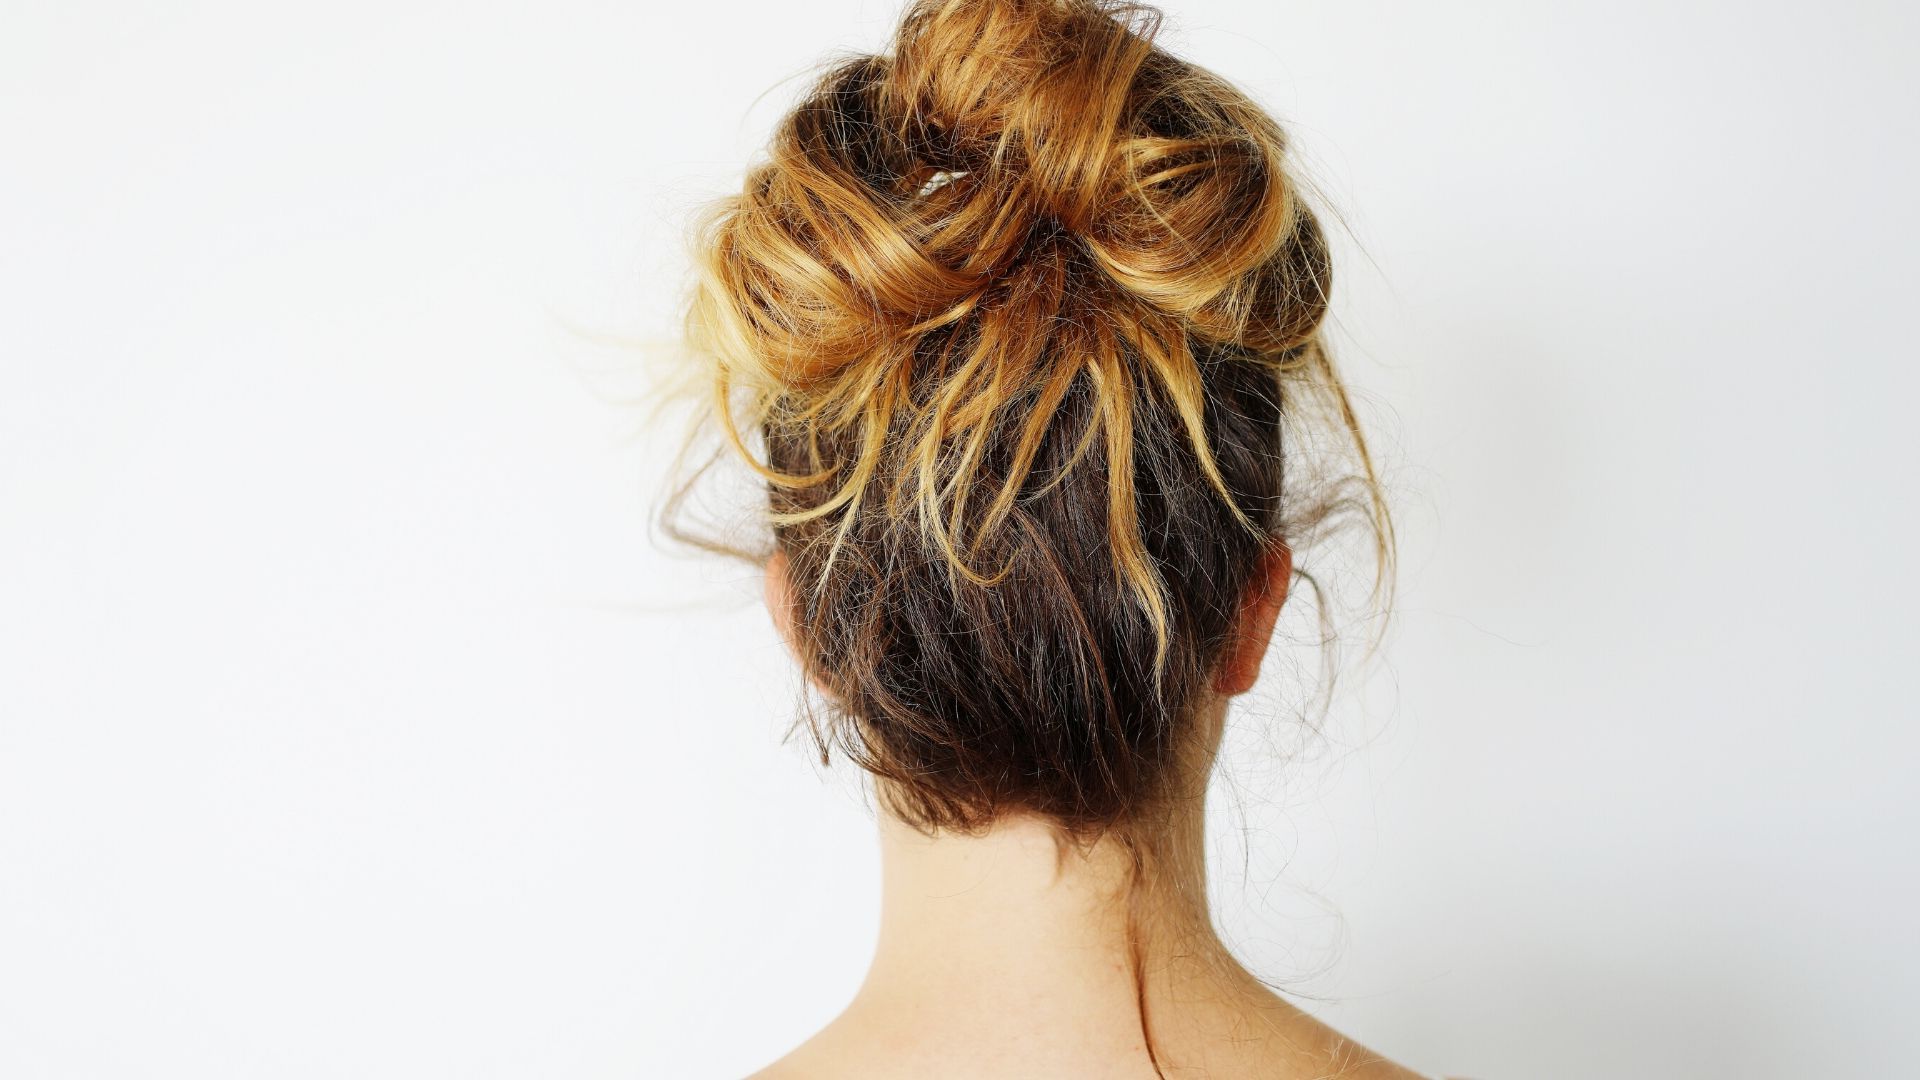 How To Make The Cutest Messy Bun In 3 Minutes Or Less! – Stonegirl Throughout Most Current Messy Pretty Bun Hairstyles (View 19 of 25)